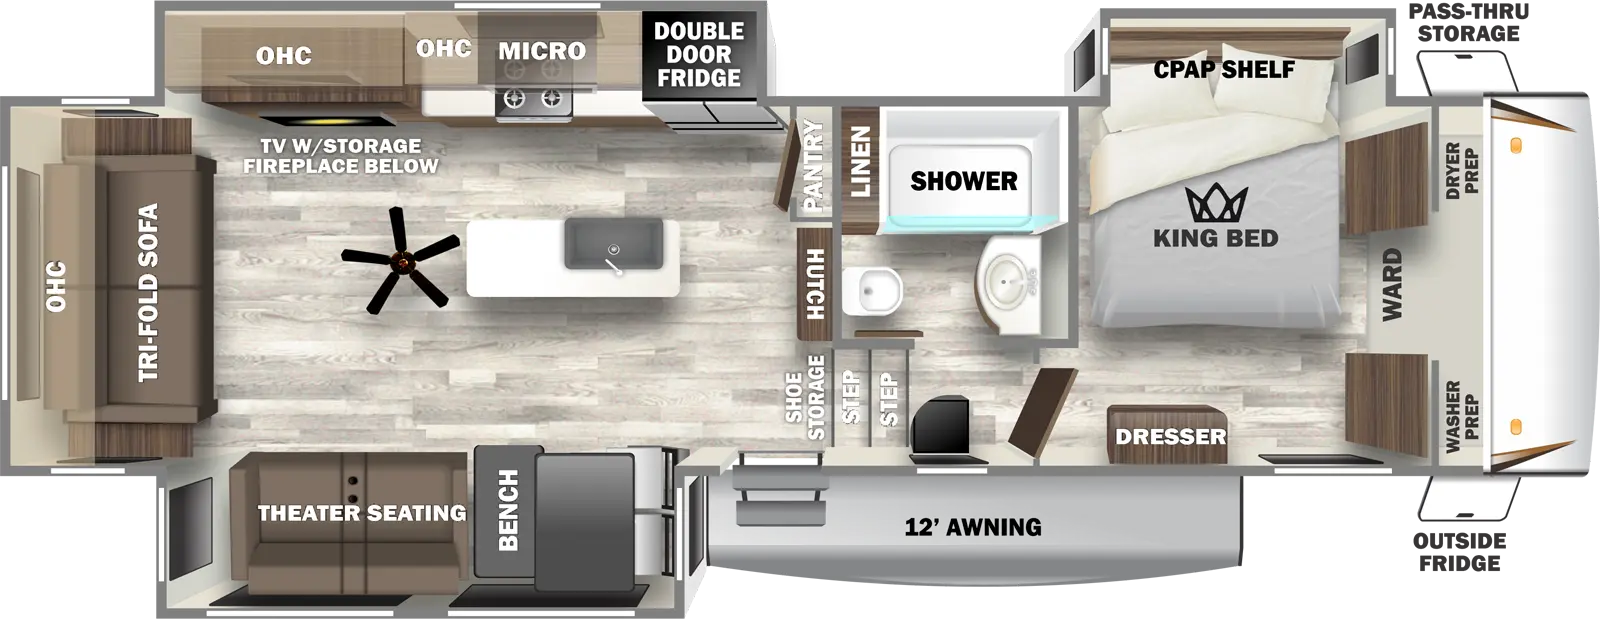 The 32GKS has three slideouts and one entry. Exterior features pass-thru storage, outside refrigerator, and 12 foot awning. Interior layout front to back: front wardrobe with washer prep and dryer prep, off-door side king bed slideout with CPAP shelf, and door side dresser; off-door sidefull bathroom with linen closet; two steps down to main living area with shoe storage, entry door, and hutch and pantry along inner wall; off-door side slideout with refrigerator, microwave, kitchen counter with cooktop, overhead cabinet, and TV with storage and fireplace below; kitchen island with sink, and paddle fan; door side slideout with dinette with two chairs and bench seating, and theater seating; rear tri-fold sofa with overhead cabinet.